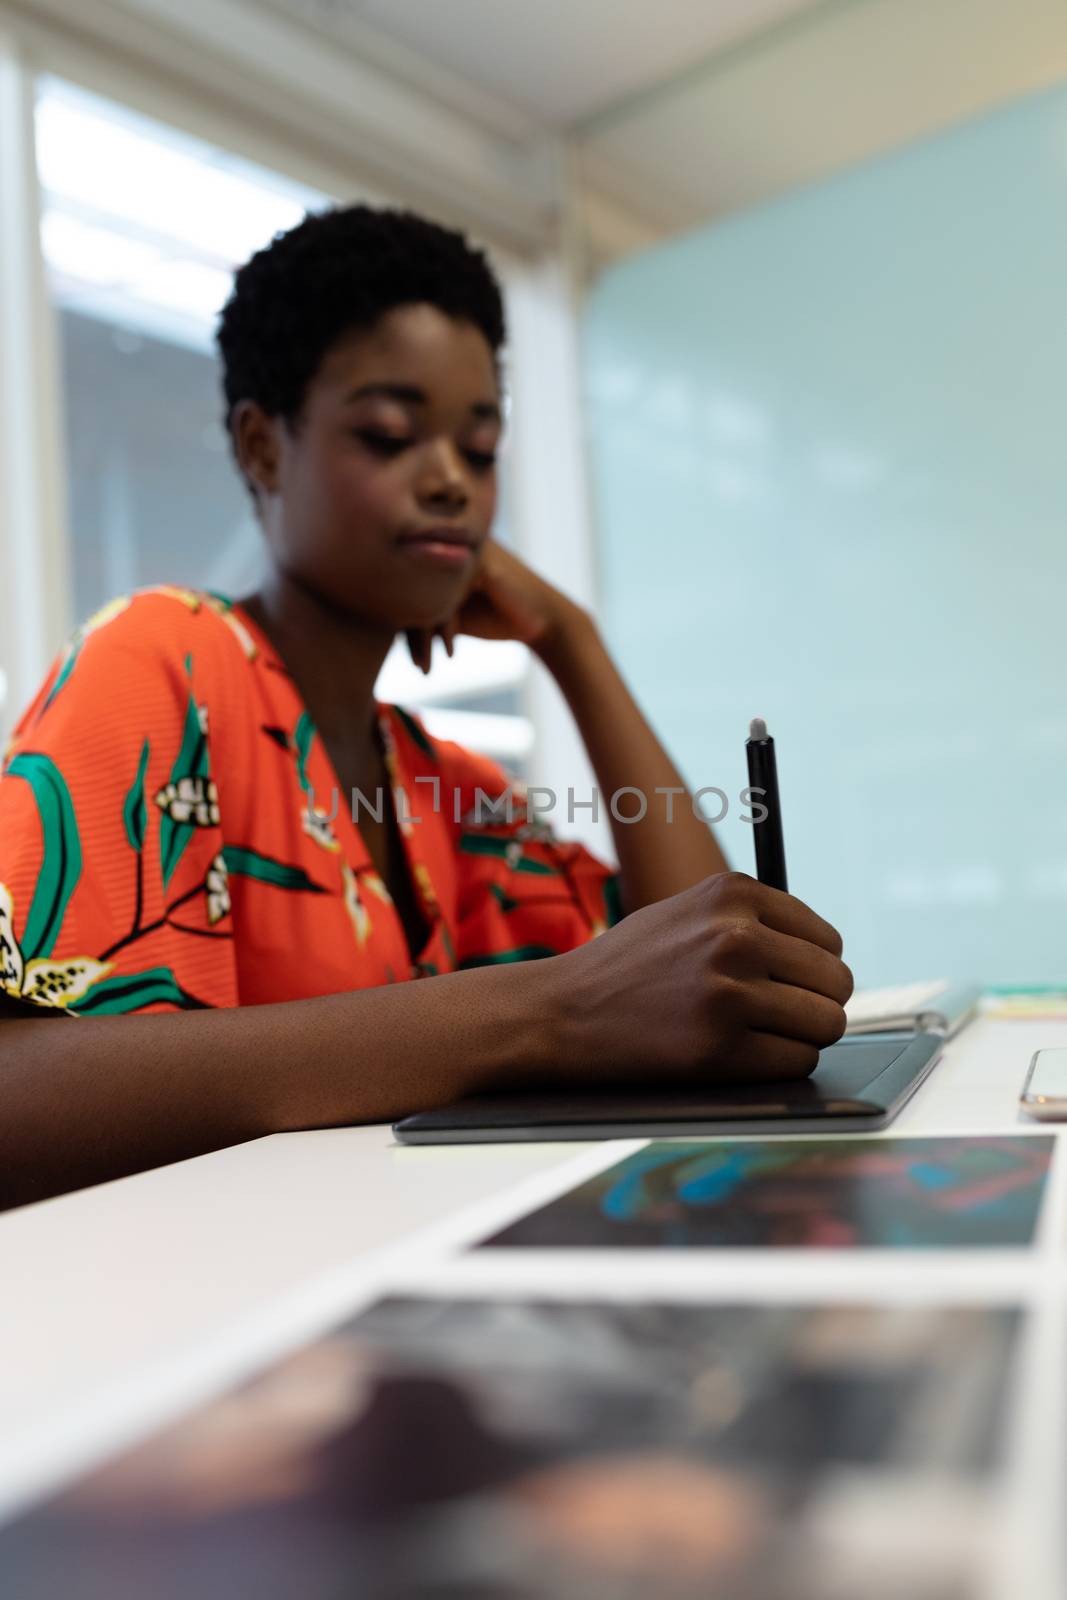 Side view of young pretty African american female graphic designer working on graphic tablet at desk in office. This is a casual creative start-up business office for a diverse team